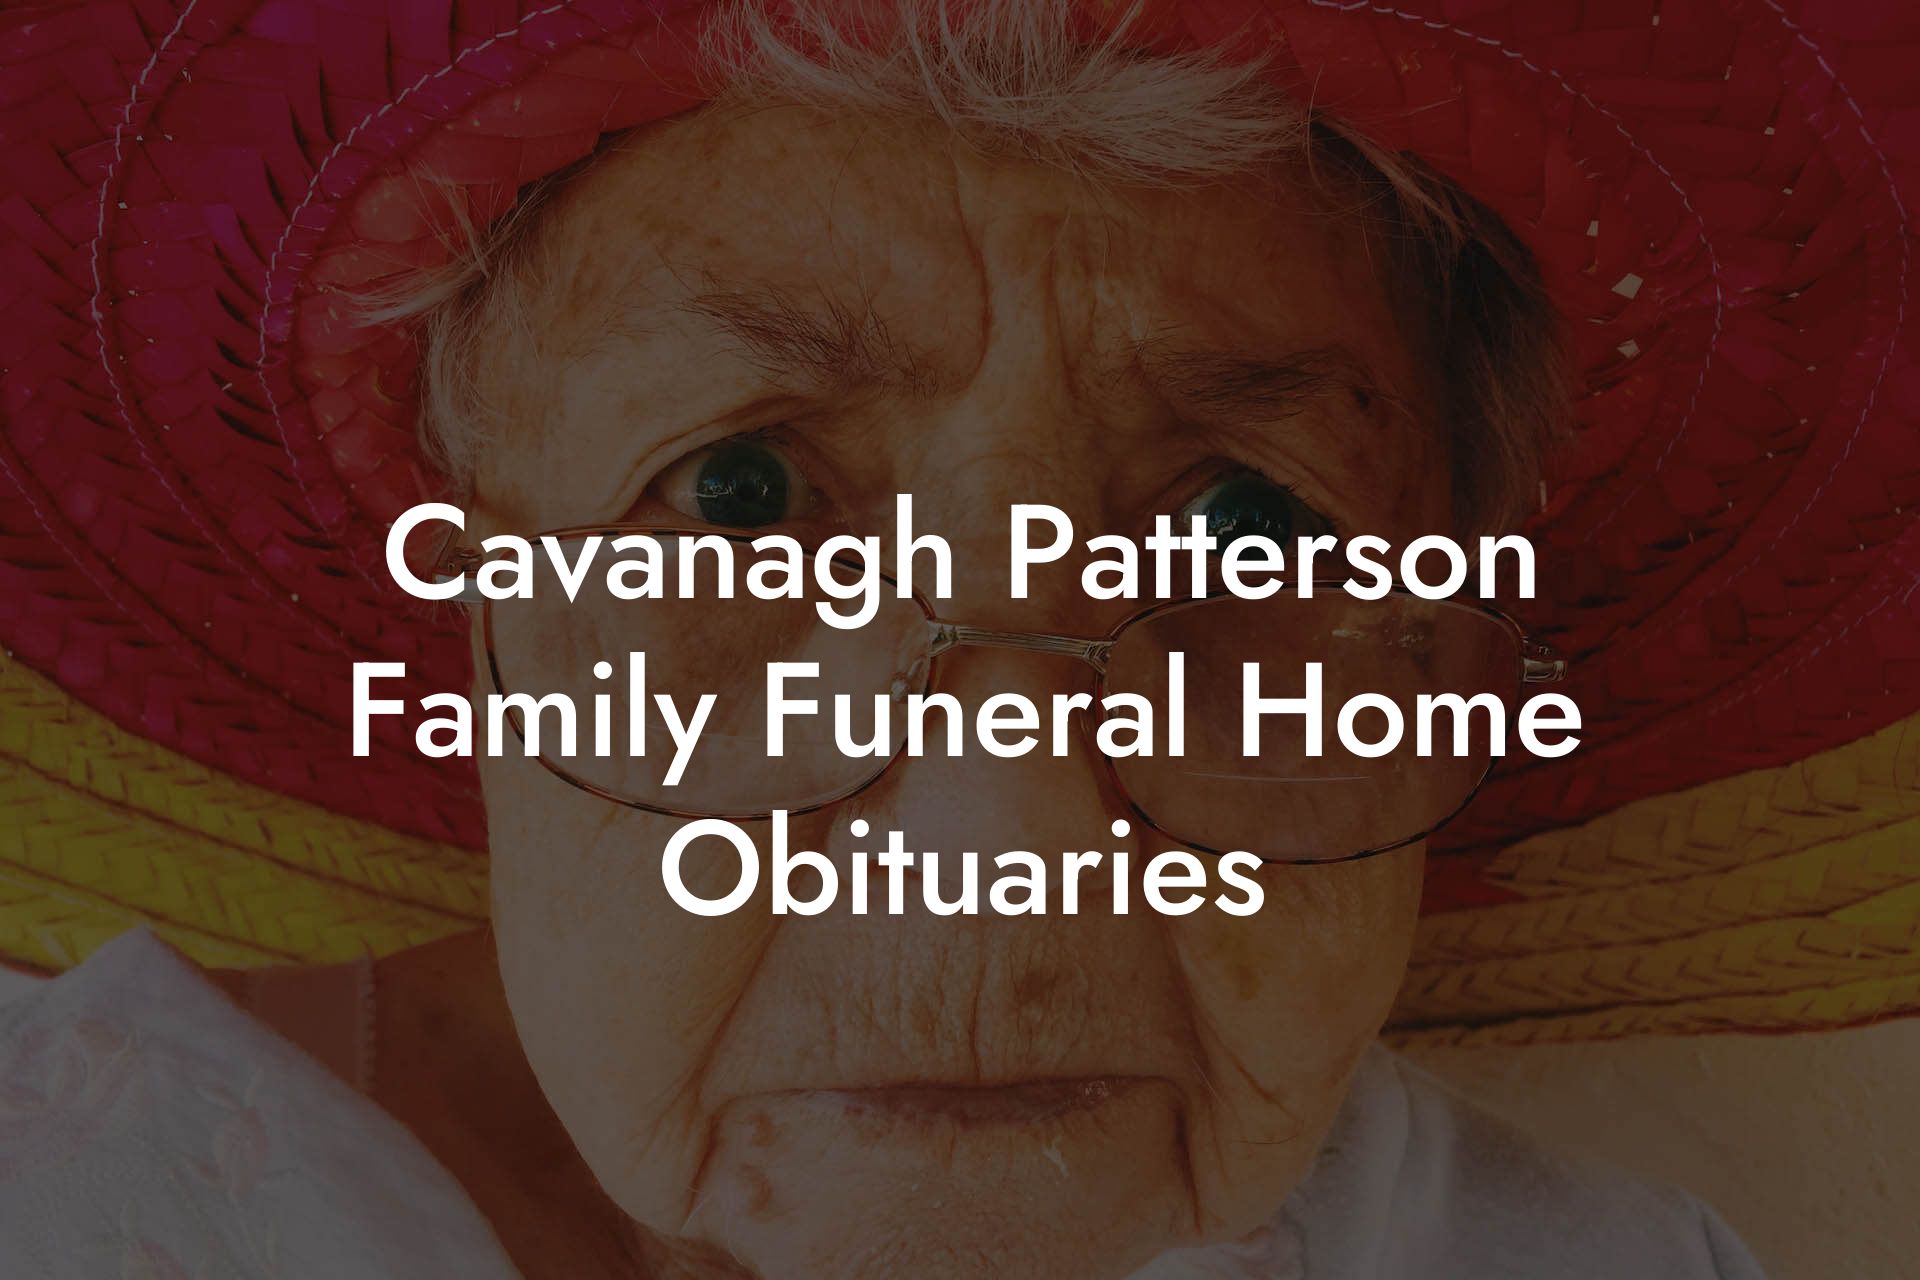 Cavanagh Patterson Family Funeral Home Obituaries